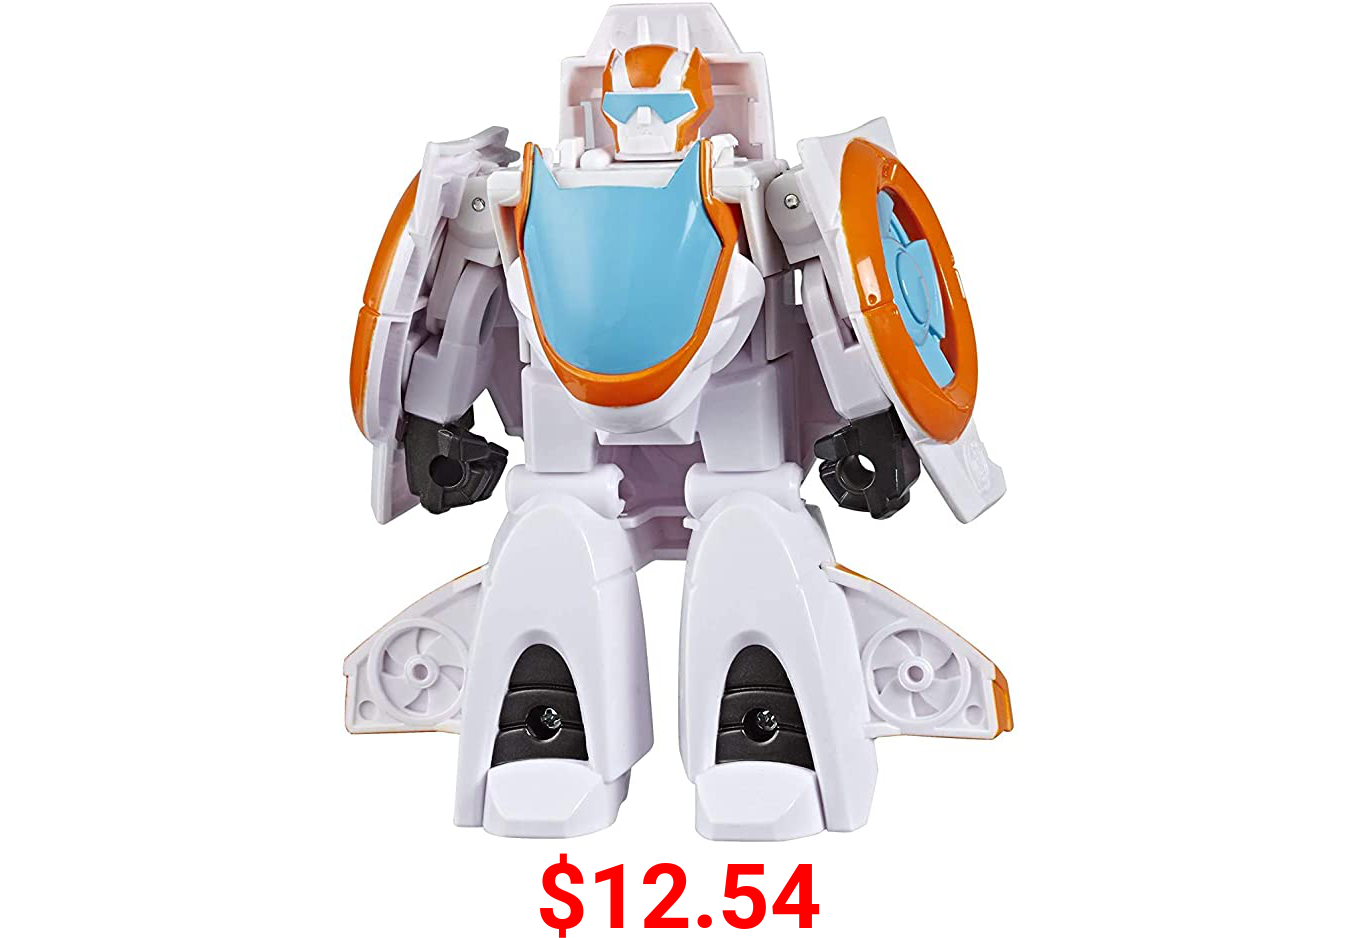 Transformers Playskool Heroes Rescue Bots Academy Blades The Flight-Bot Converting Toy, 4.5" Action Figure, Toys for Kids Ages 3 & Up